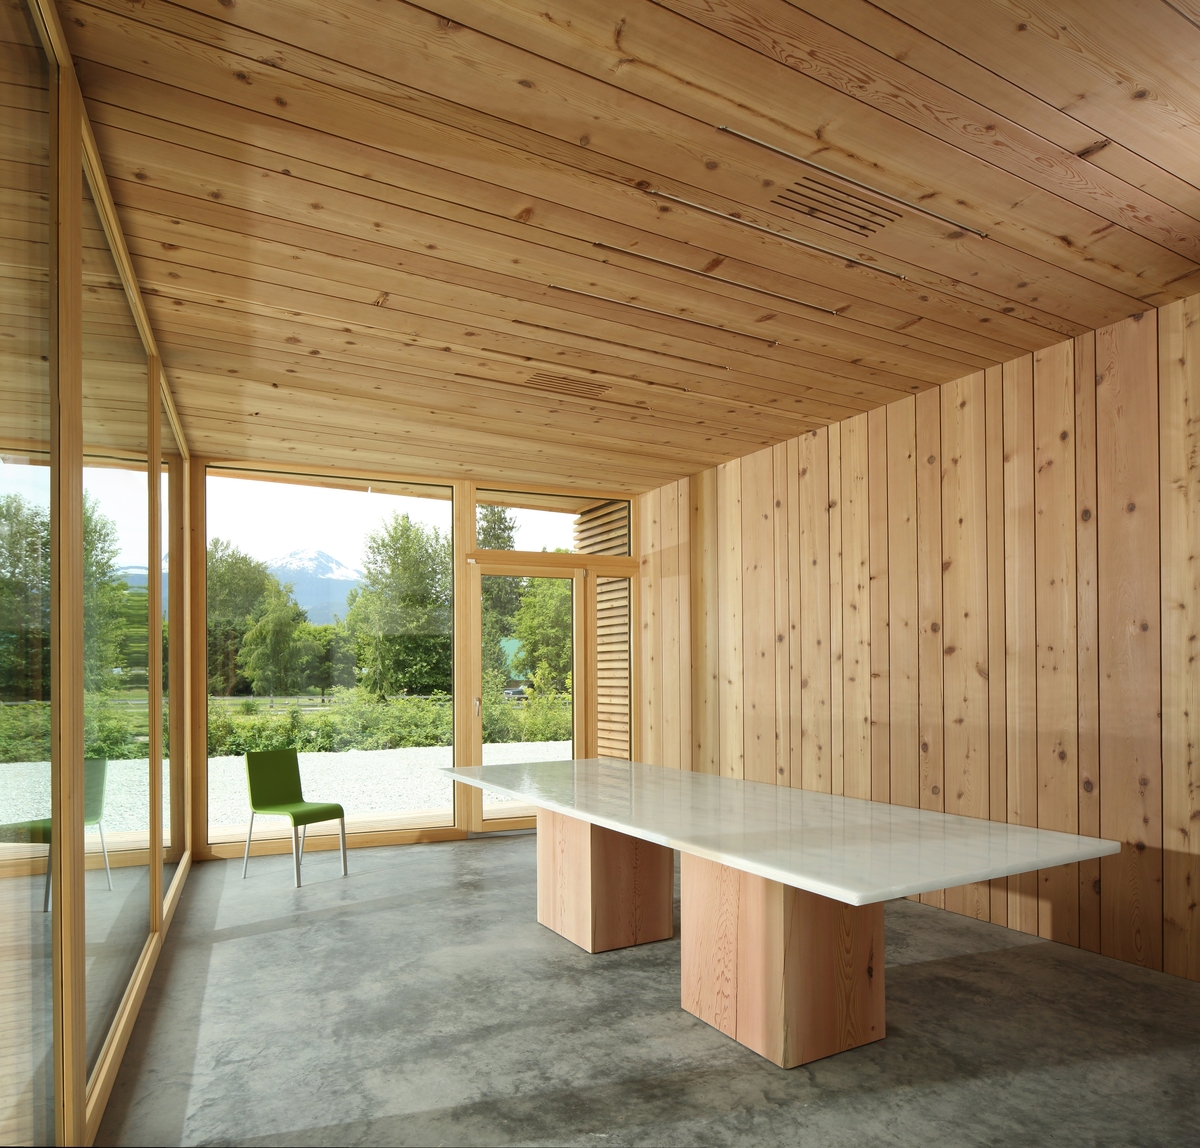 Interior afternoon view of BC Passive House Factory meeting room showing wood wall paneling and wood ceiling paneling with large glass expanses looking outward